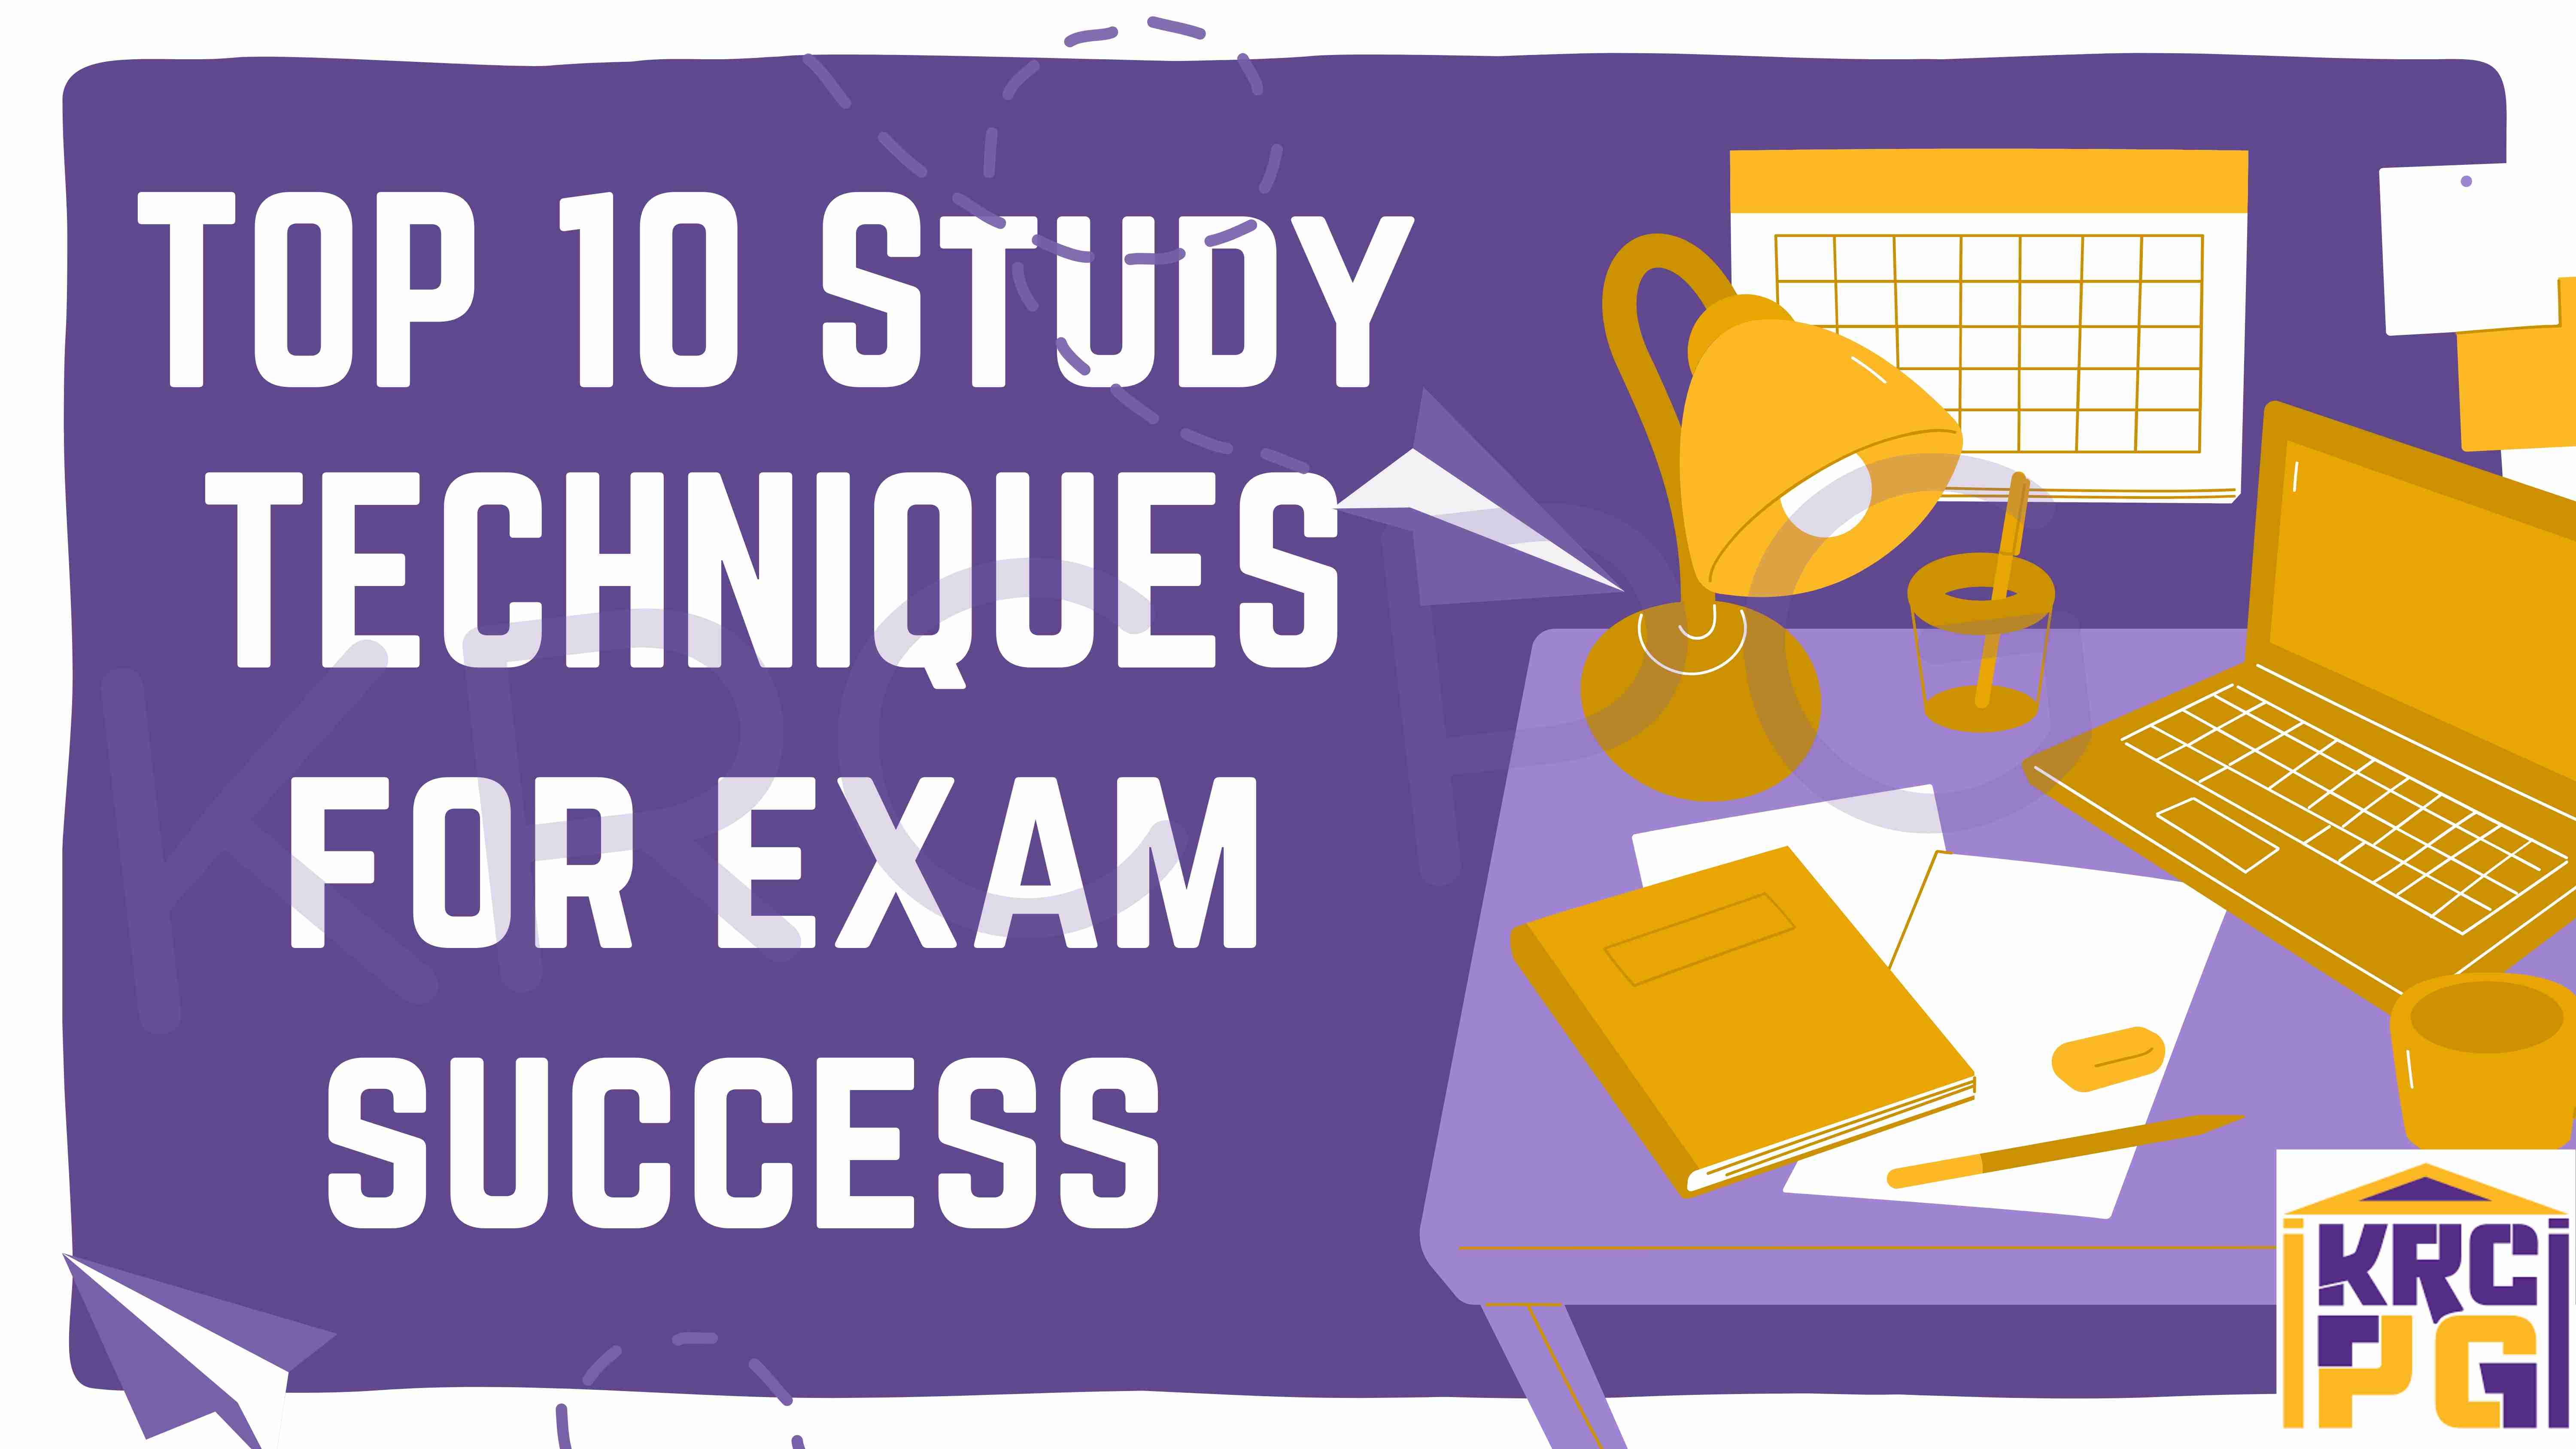 TOP 10 STUDY TIPS & TECHNIQUES FOR EXAM SUCCESS